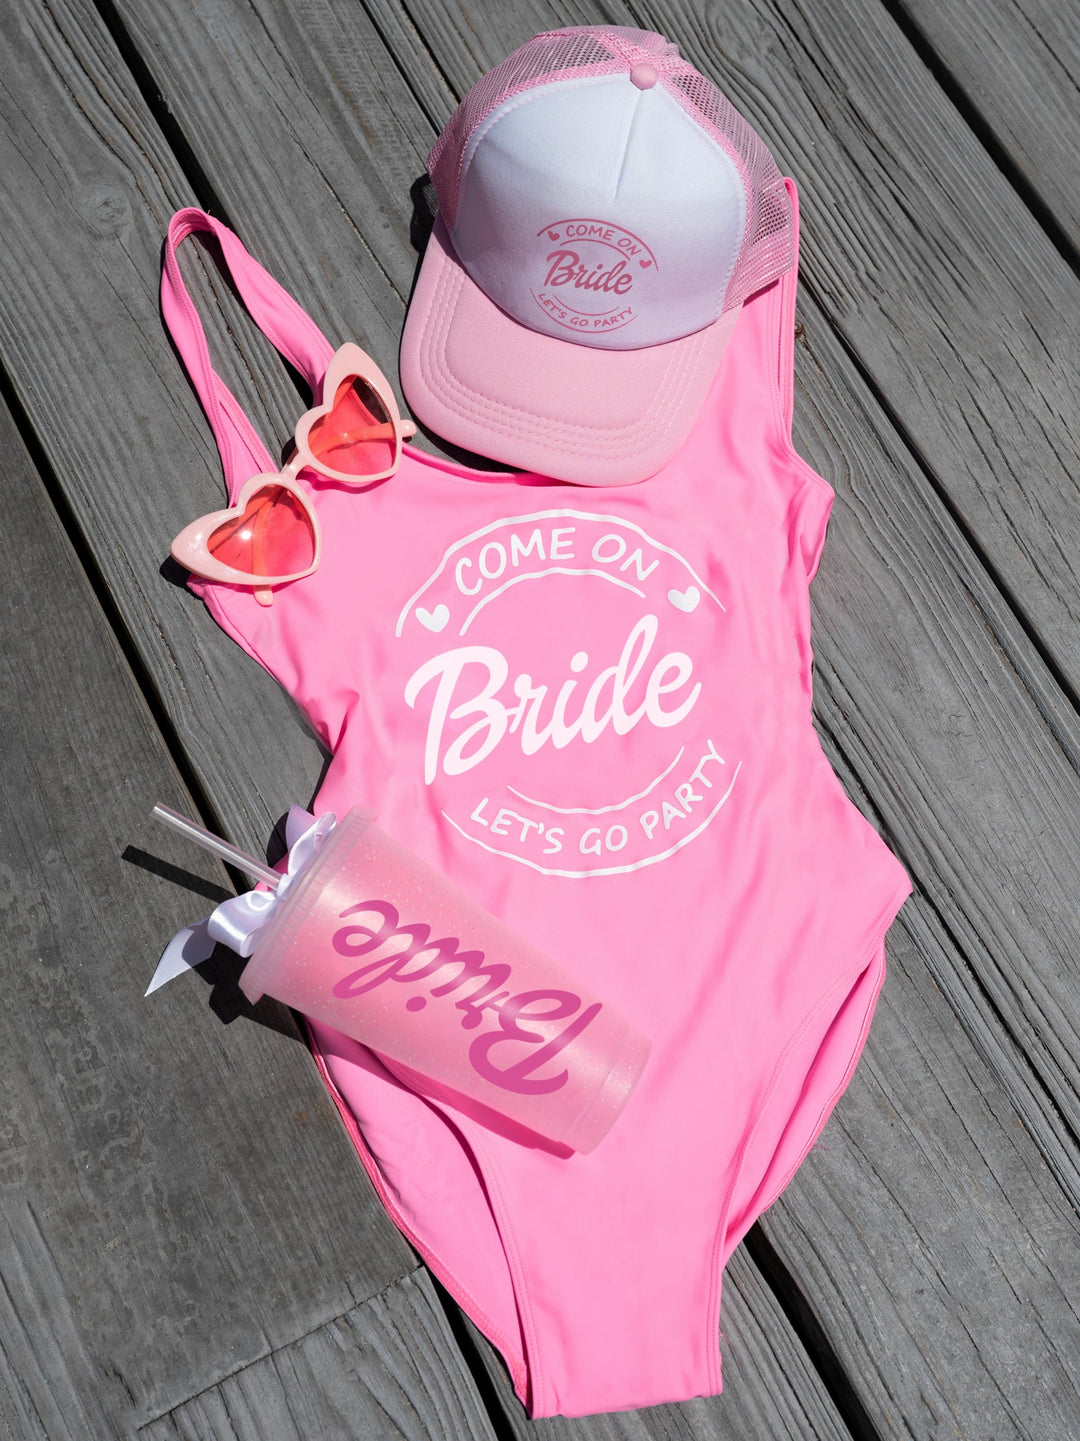 Come on Bride - Let’s Go Party Pink Dolly Set